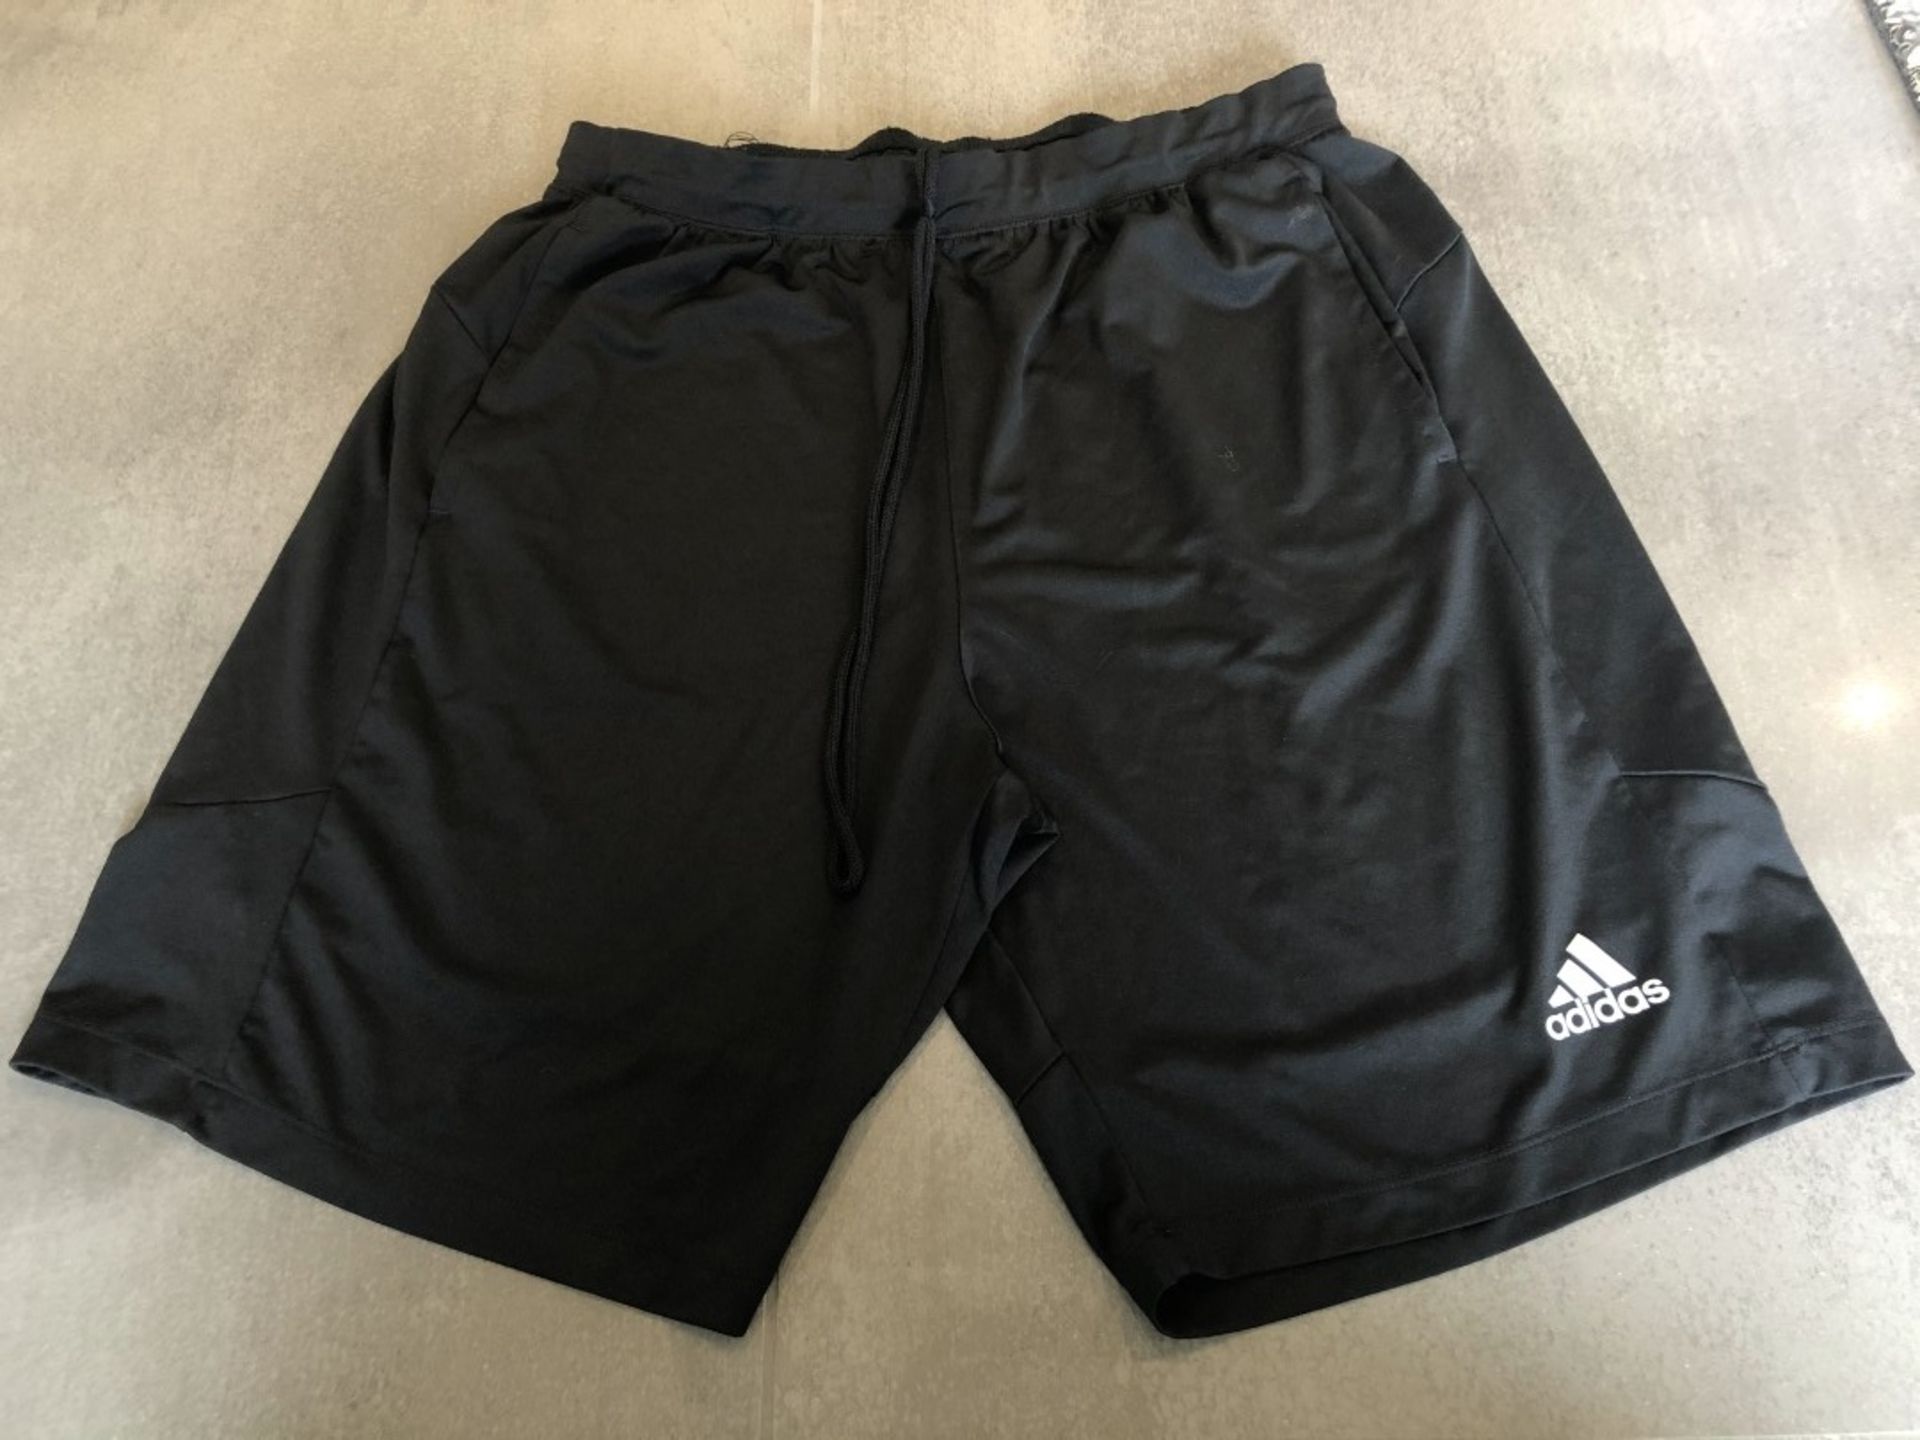 4 x Assorted Pairs Of Men's Genuine Adidas Shorts - AllIn Black - Sizes: L-XL - Preowned - Image 14 of 23